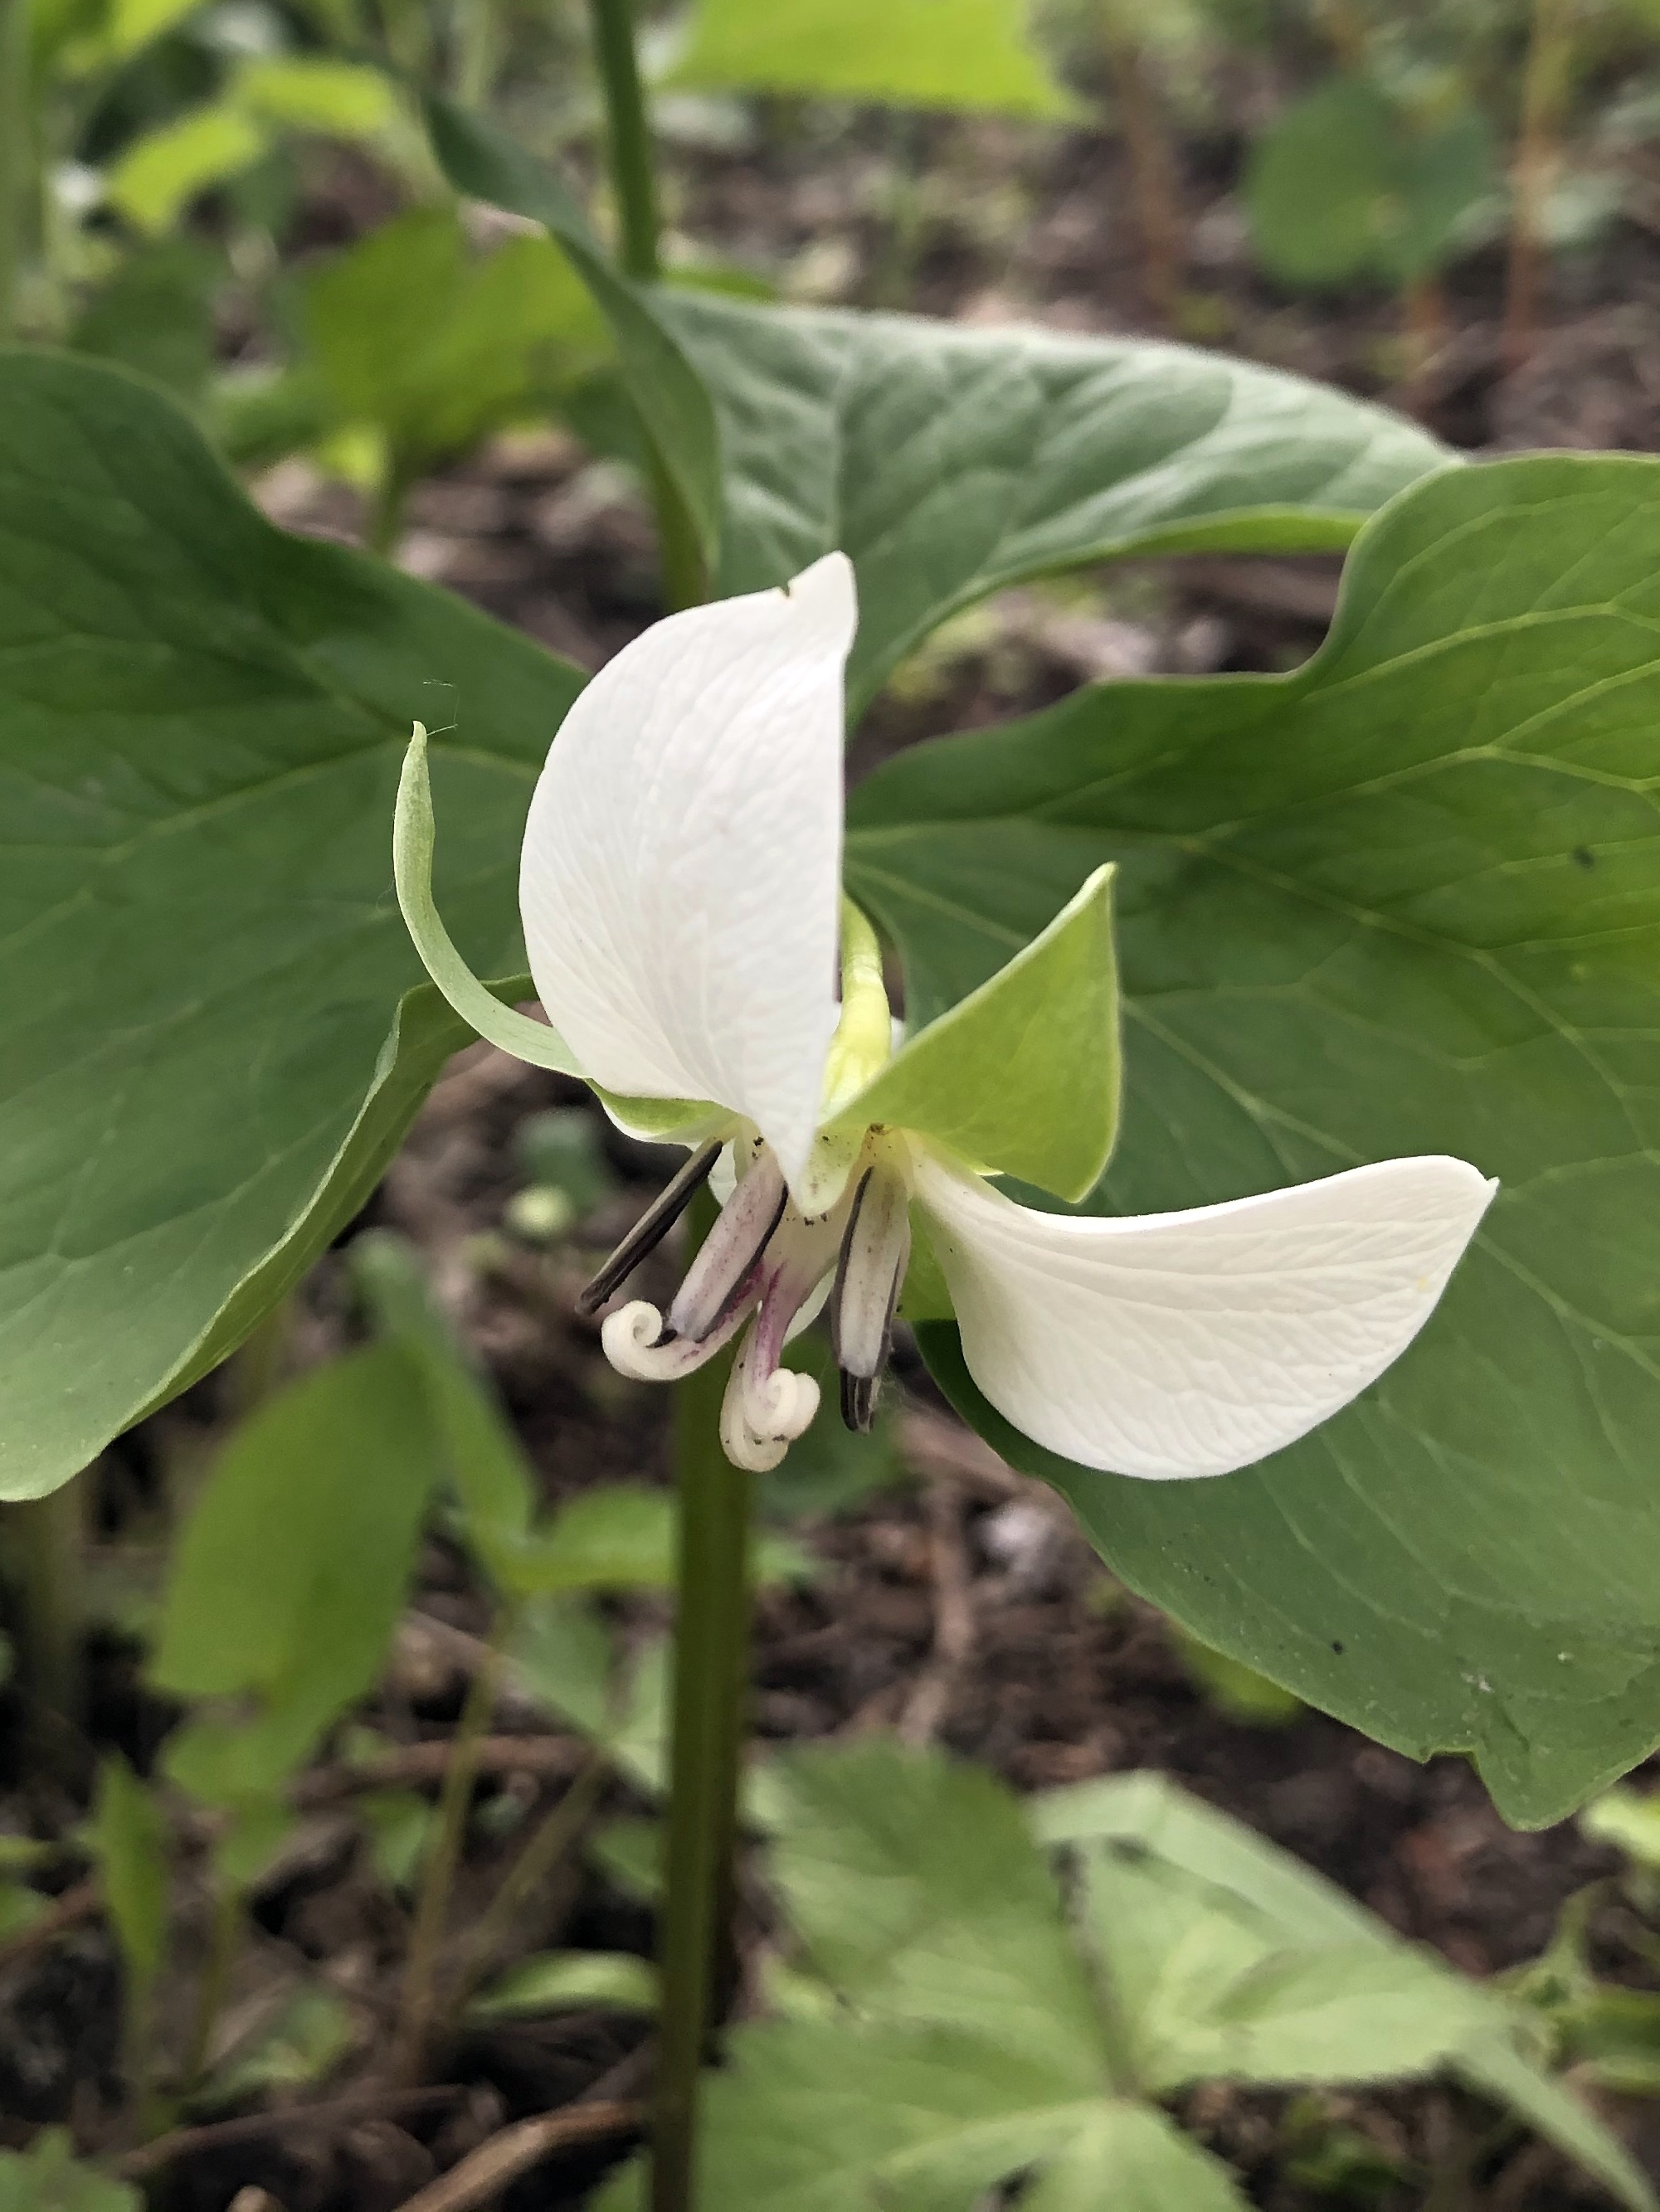 Drooping Trillium near Council Ring in Oak Savanna in Madison, Wisconsin on May 10, 2021.